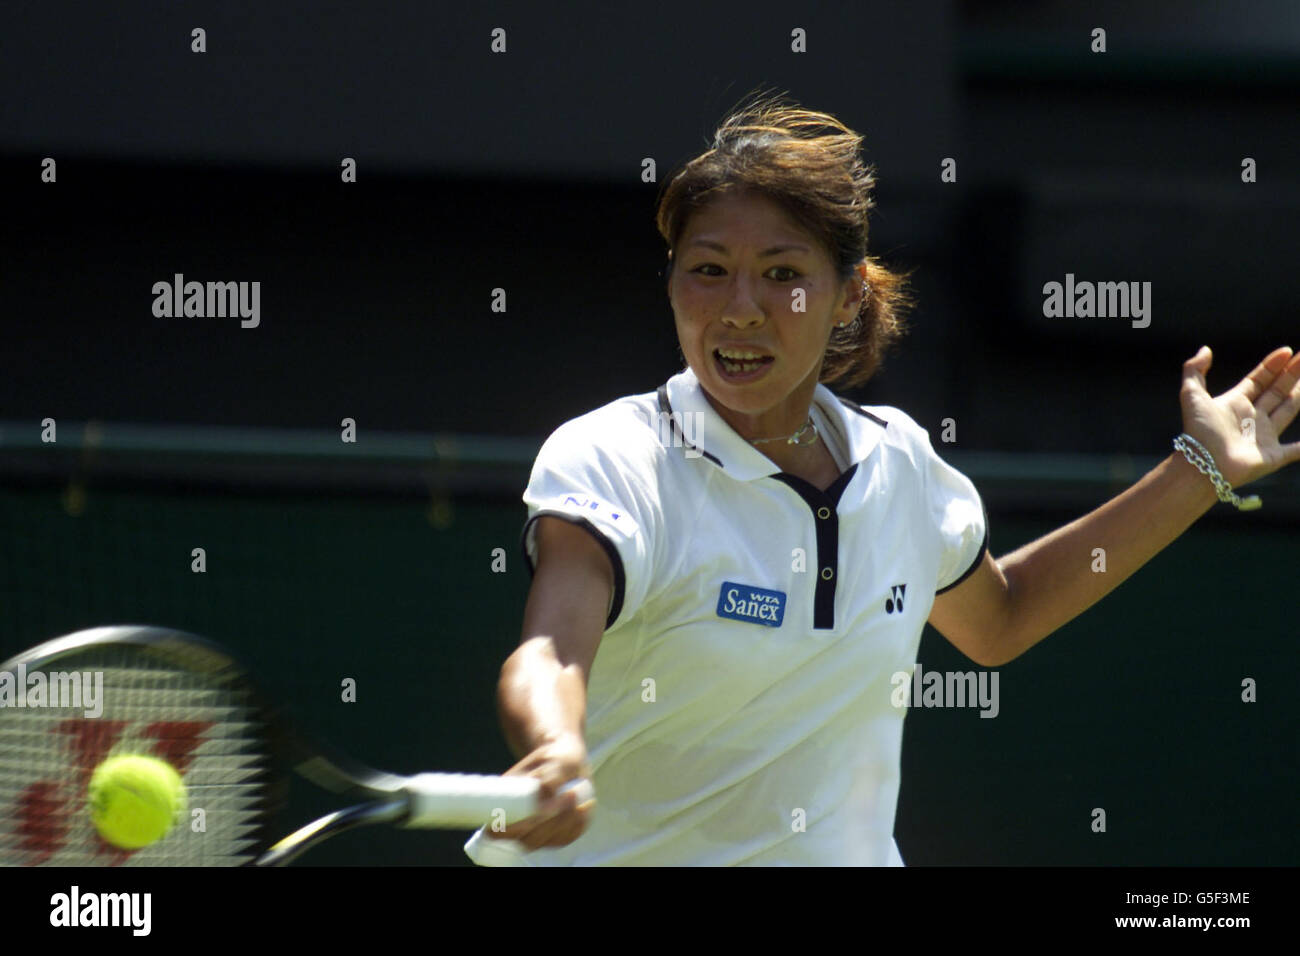 Japan's Shinobu Asagoe in action against USA's Venus Wiilliams during the First Round match of the 2001 Lawn Tennis Championships at Wimbledon, London. Stock Photo